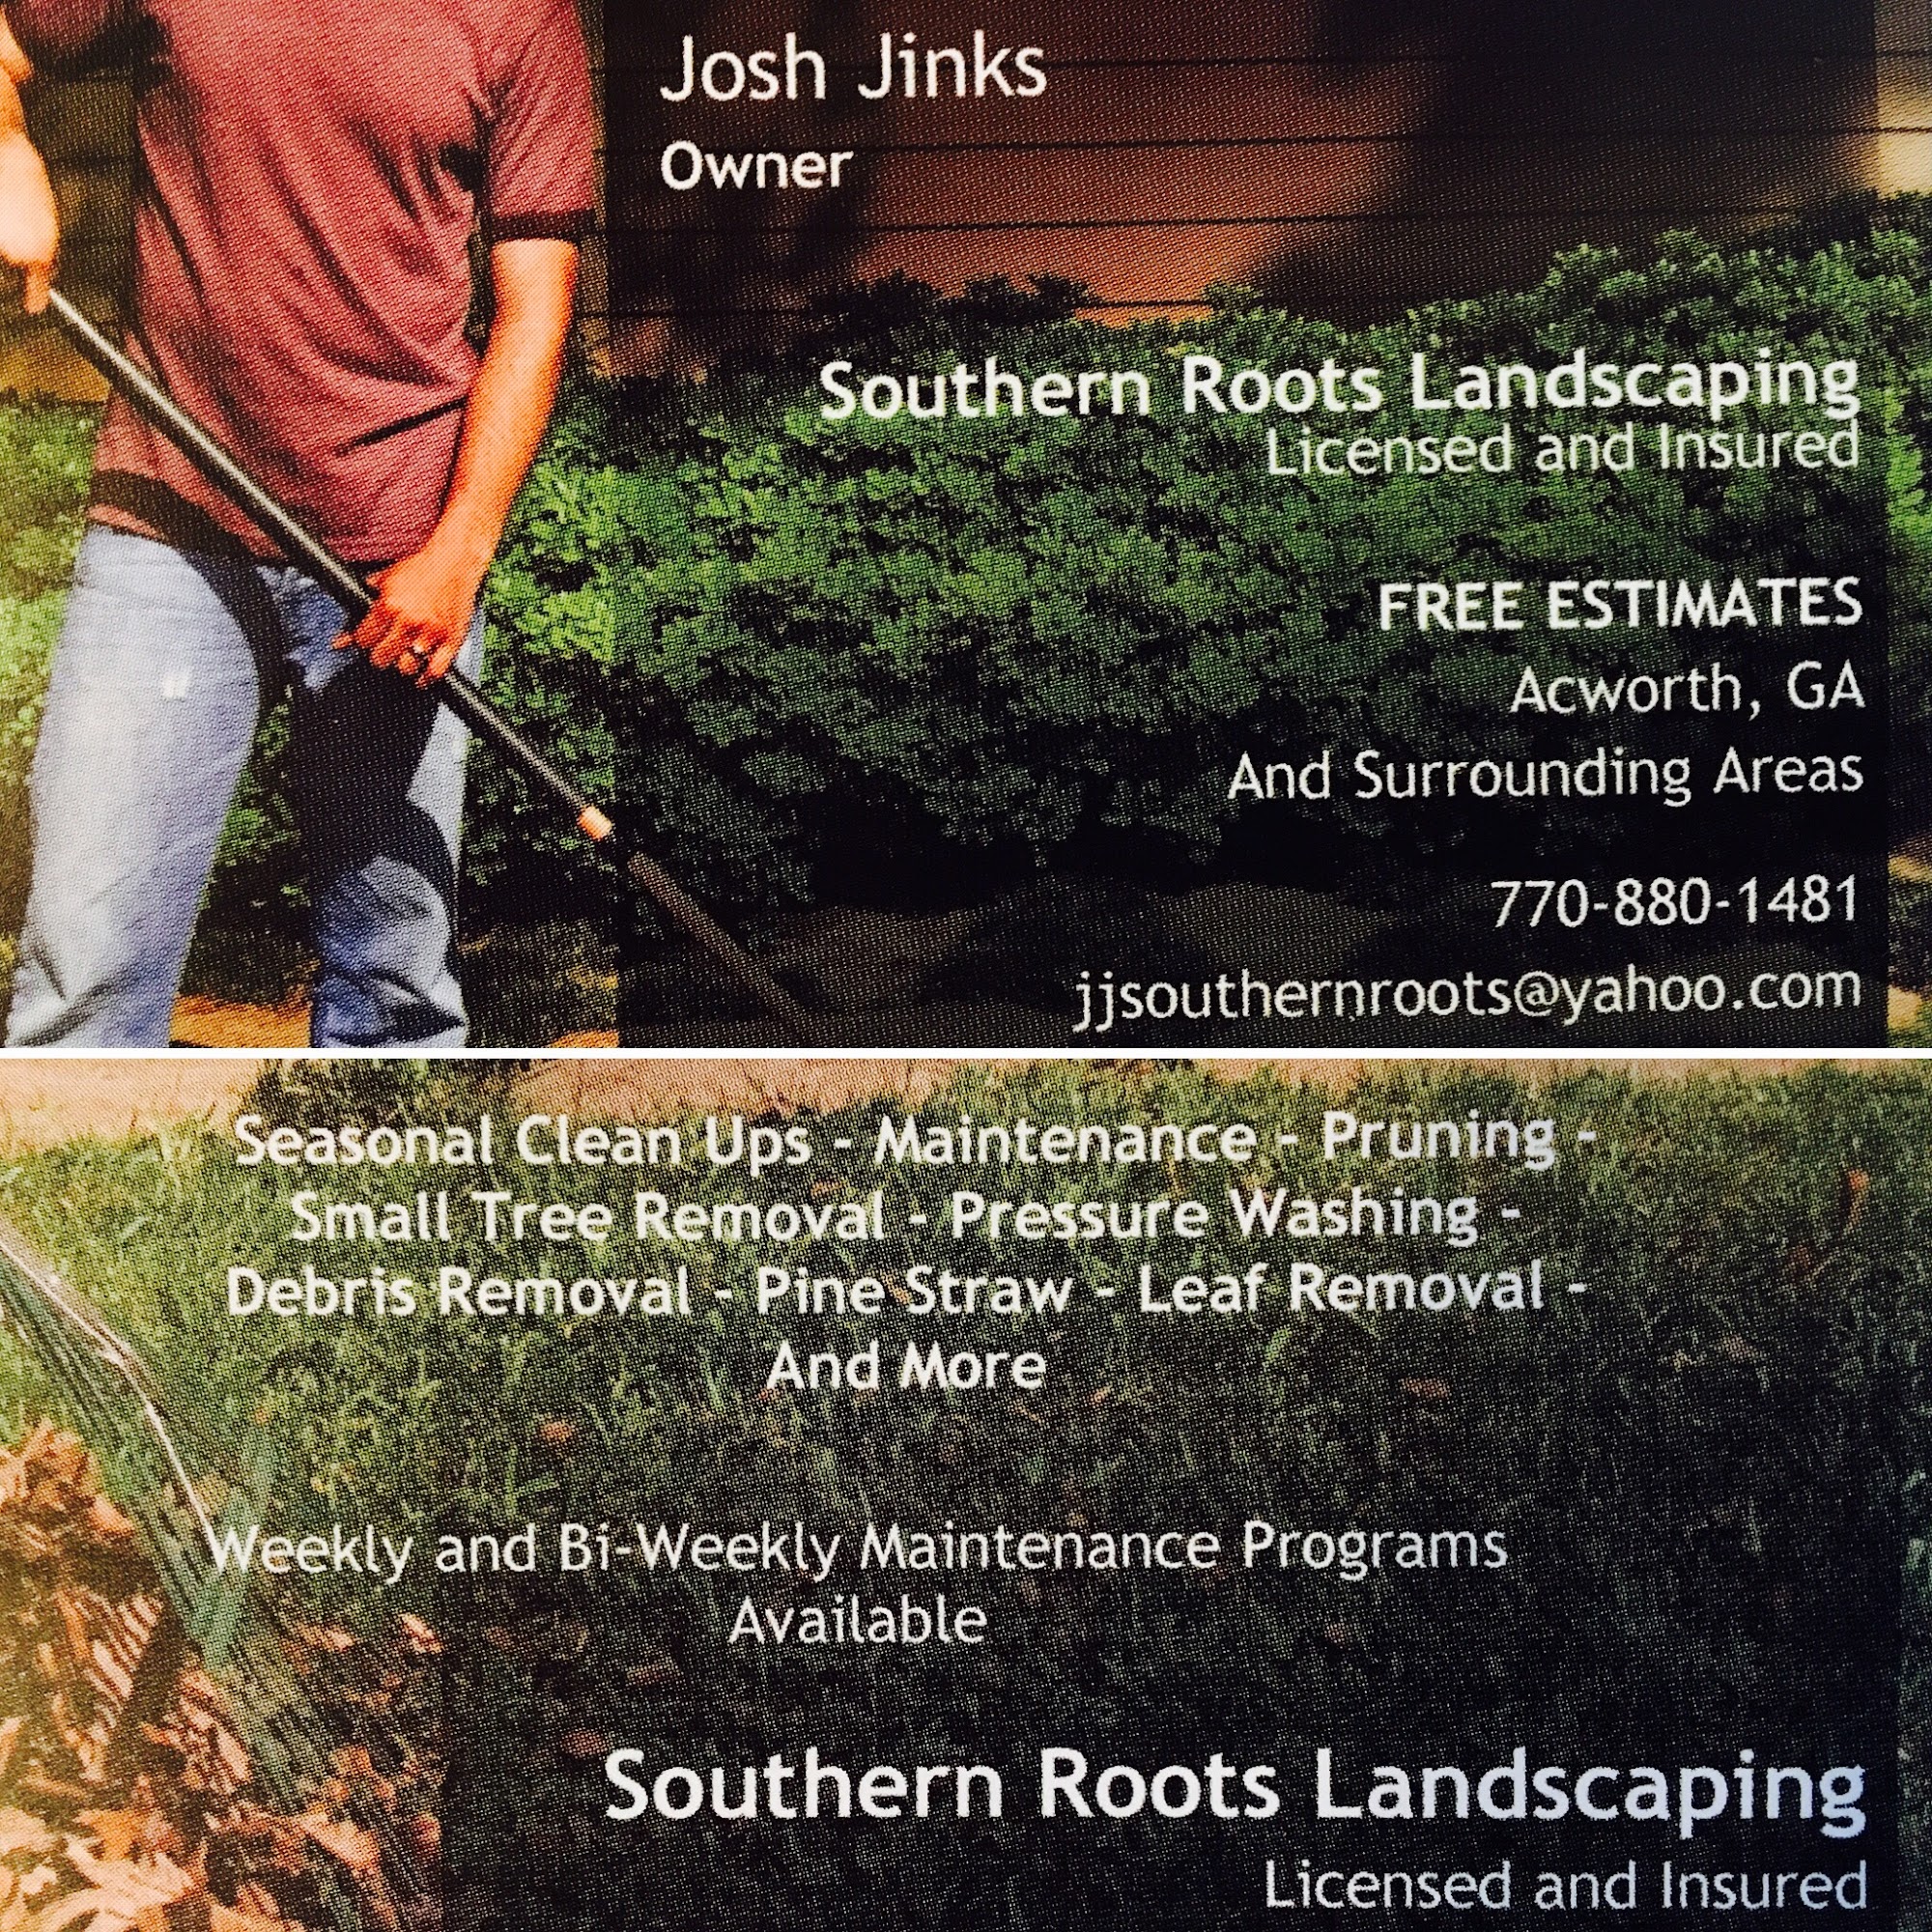 Southern Roots Landscaping